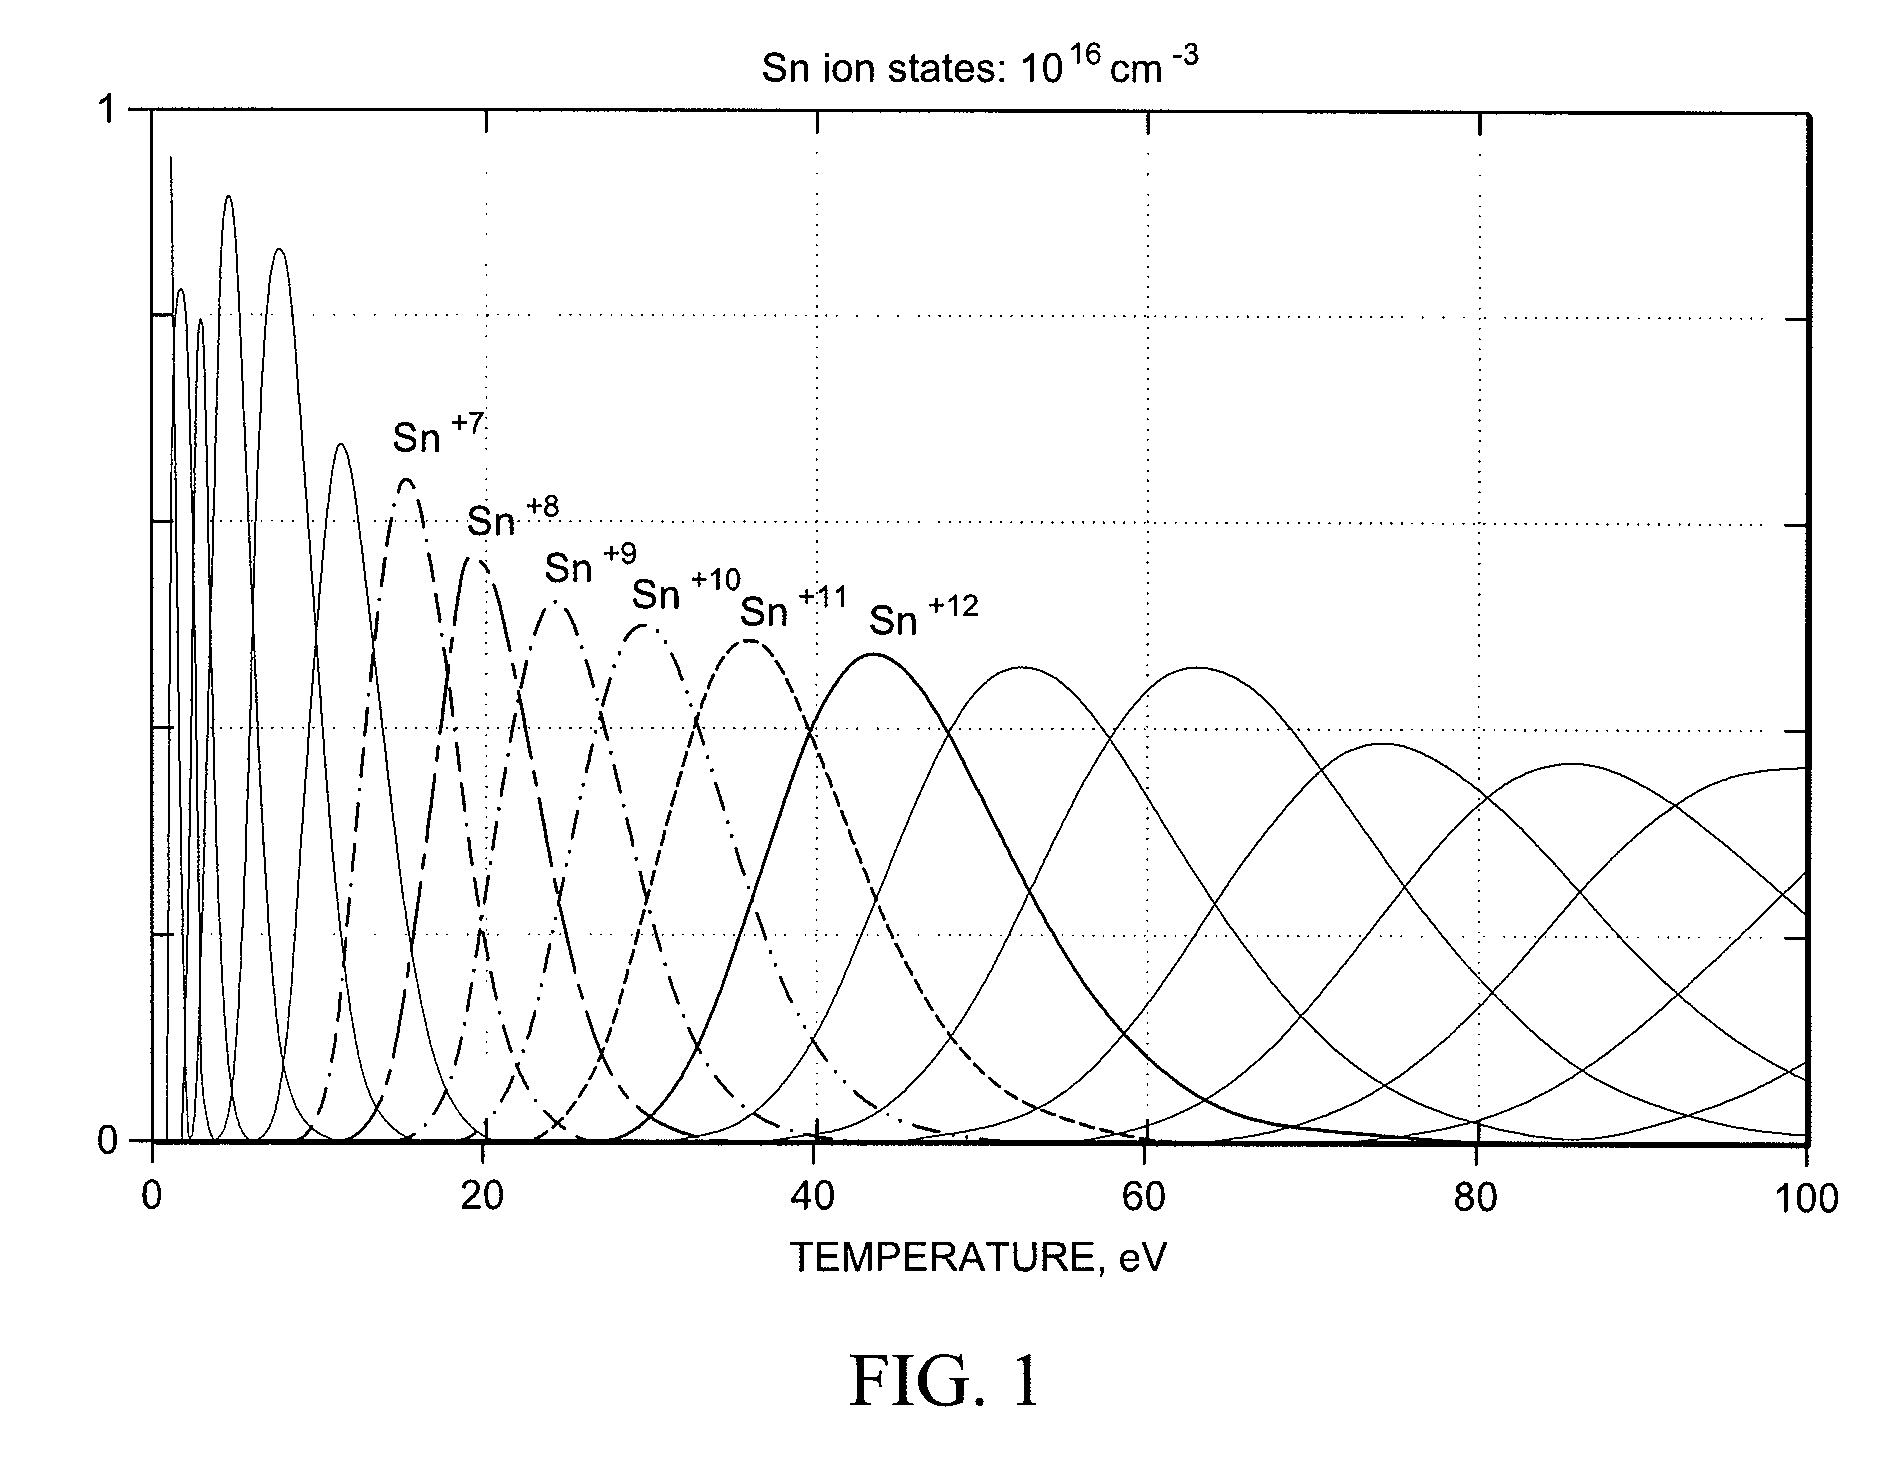 Systems and methods for monitoring and controlling the operation of extreme ultraviolet (EUV) light sources used in semiconductor fabrication